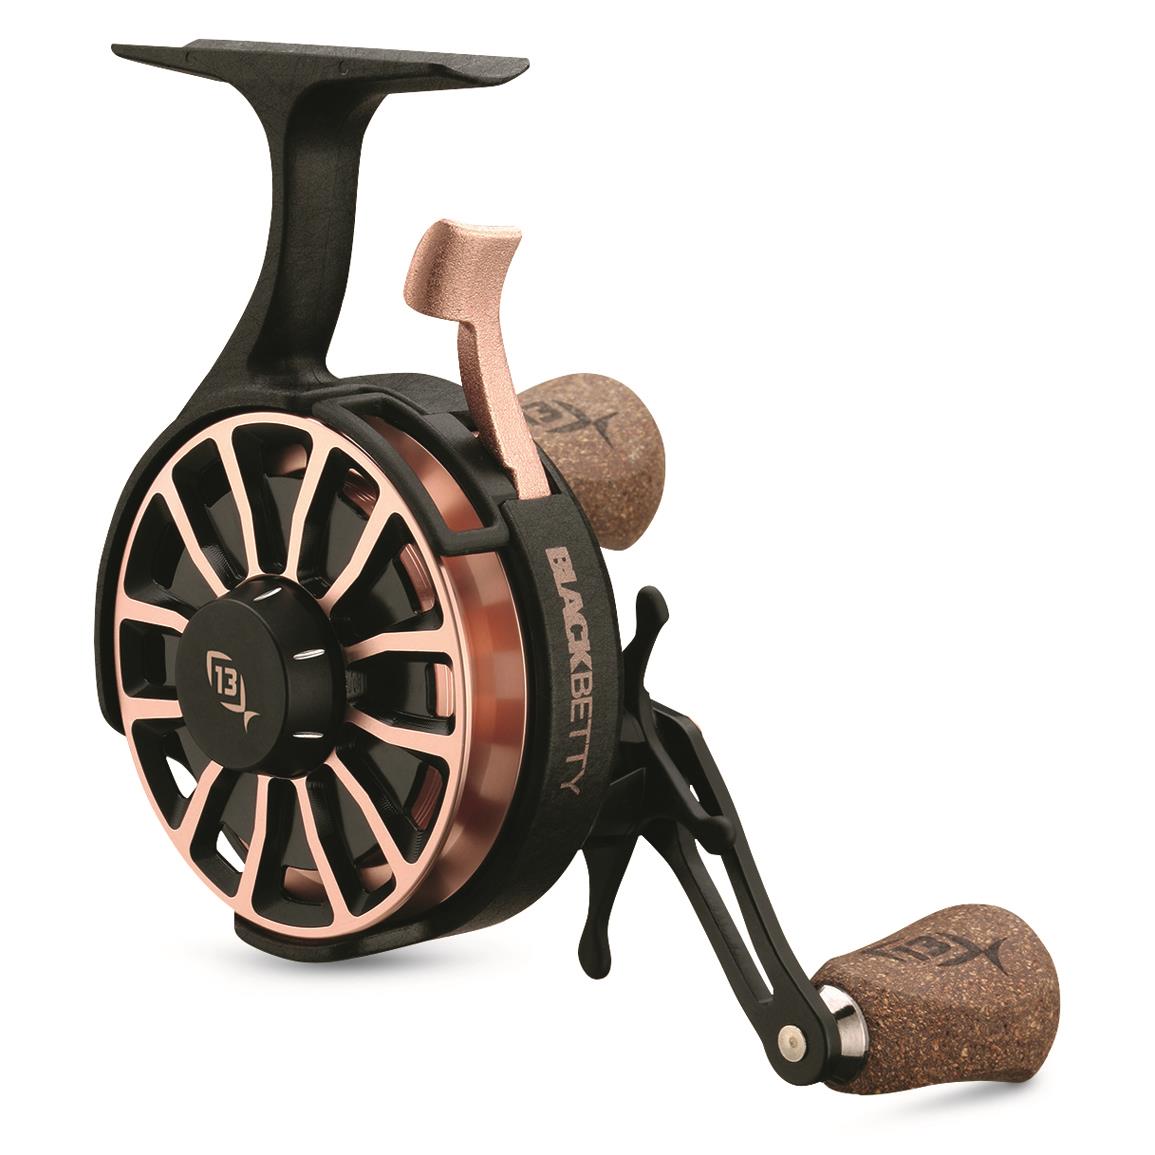 13 Fishing Black Betty Reel Deals – From $74.29 – IceFishingDeals